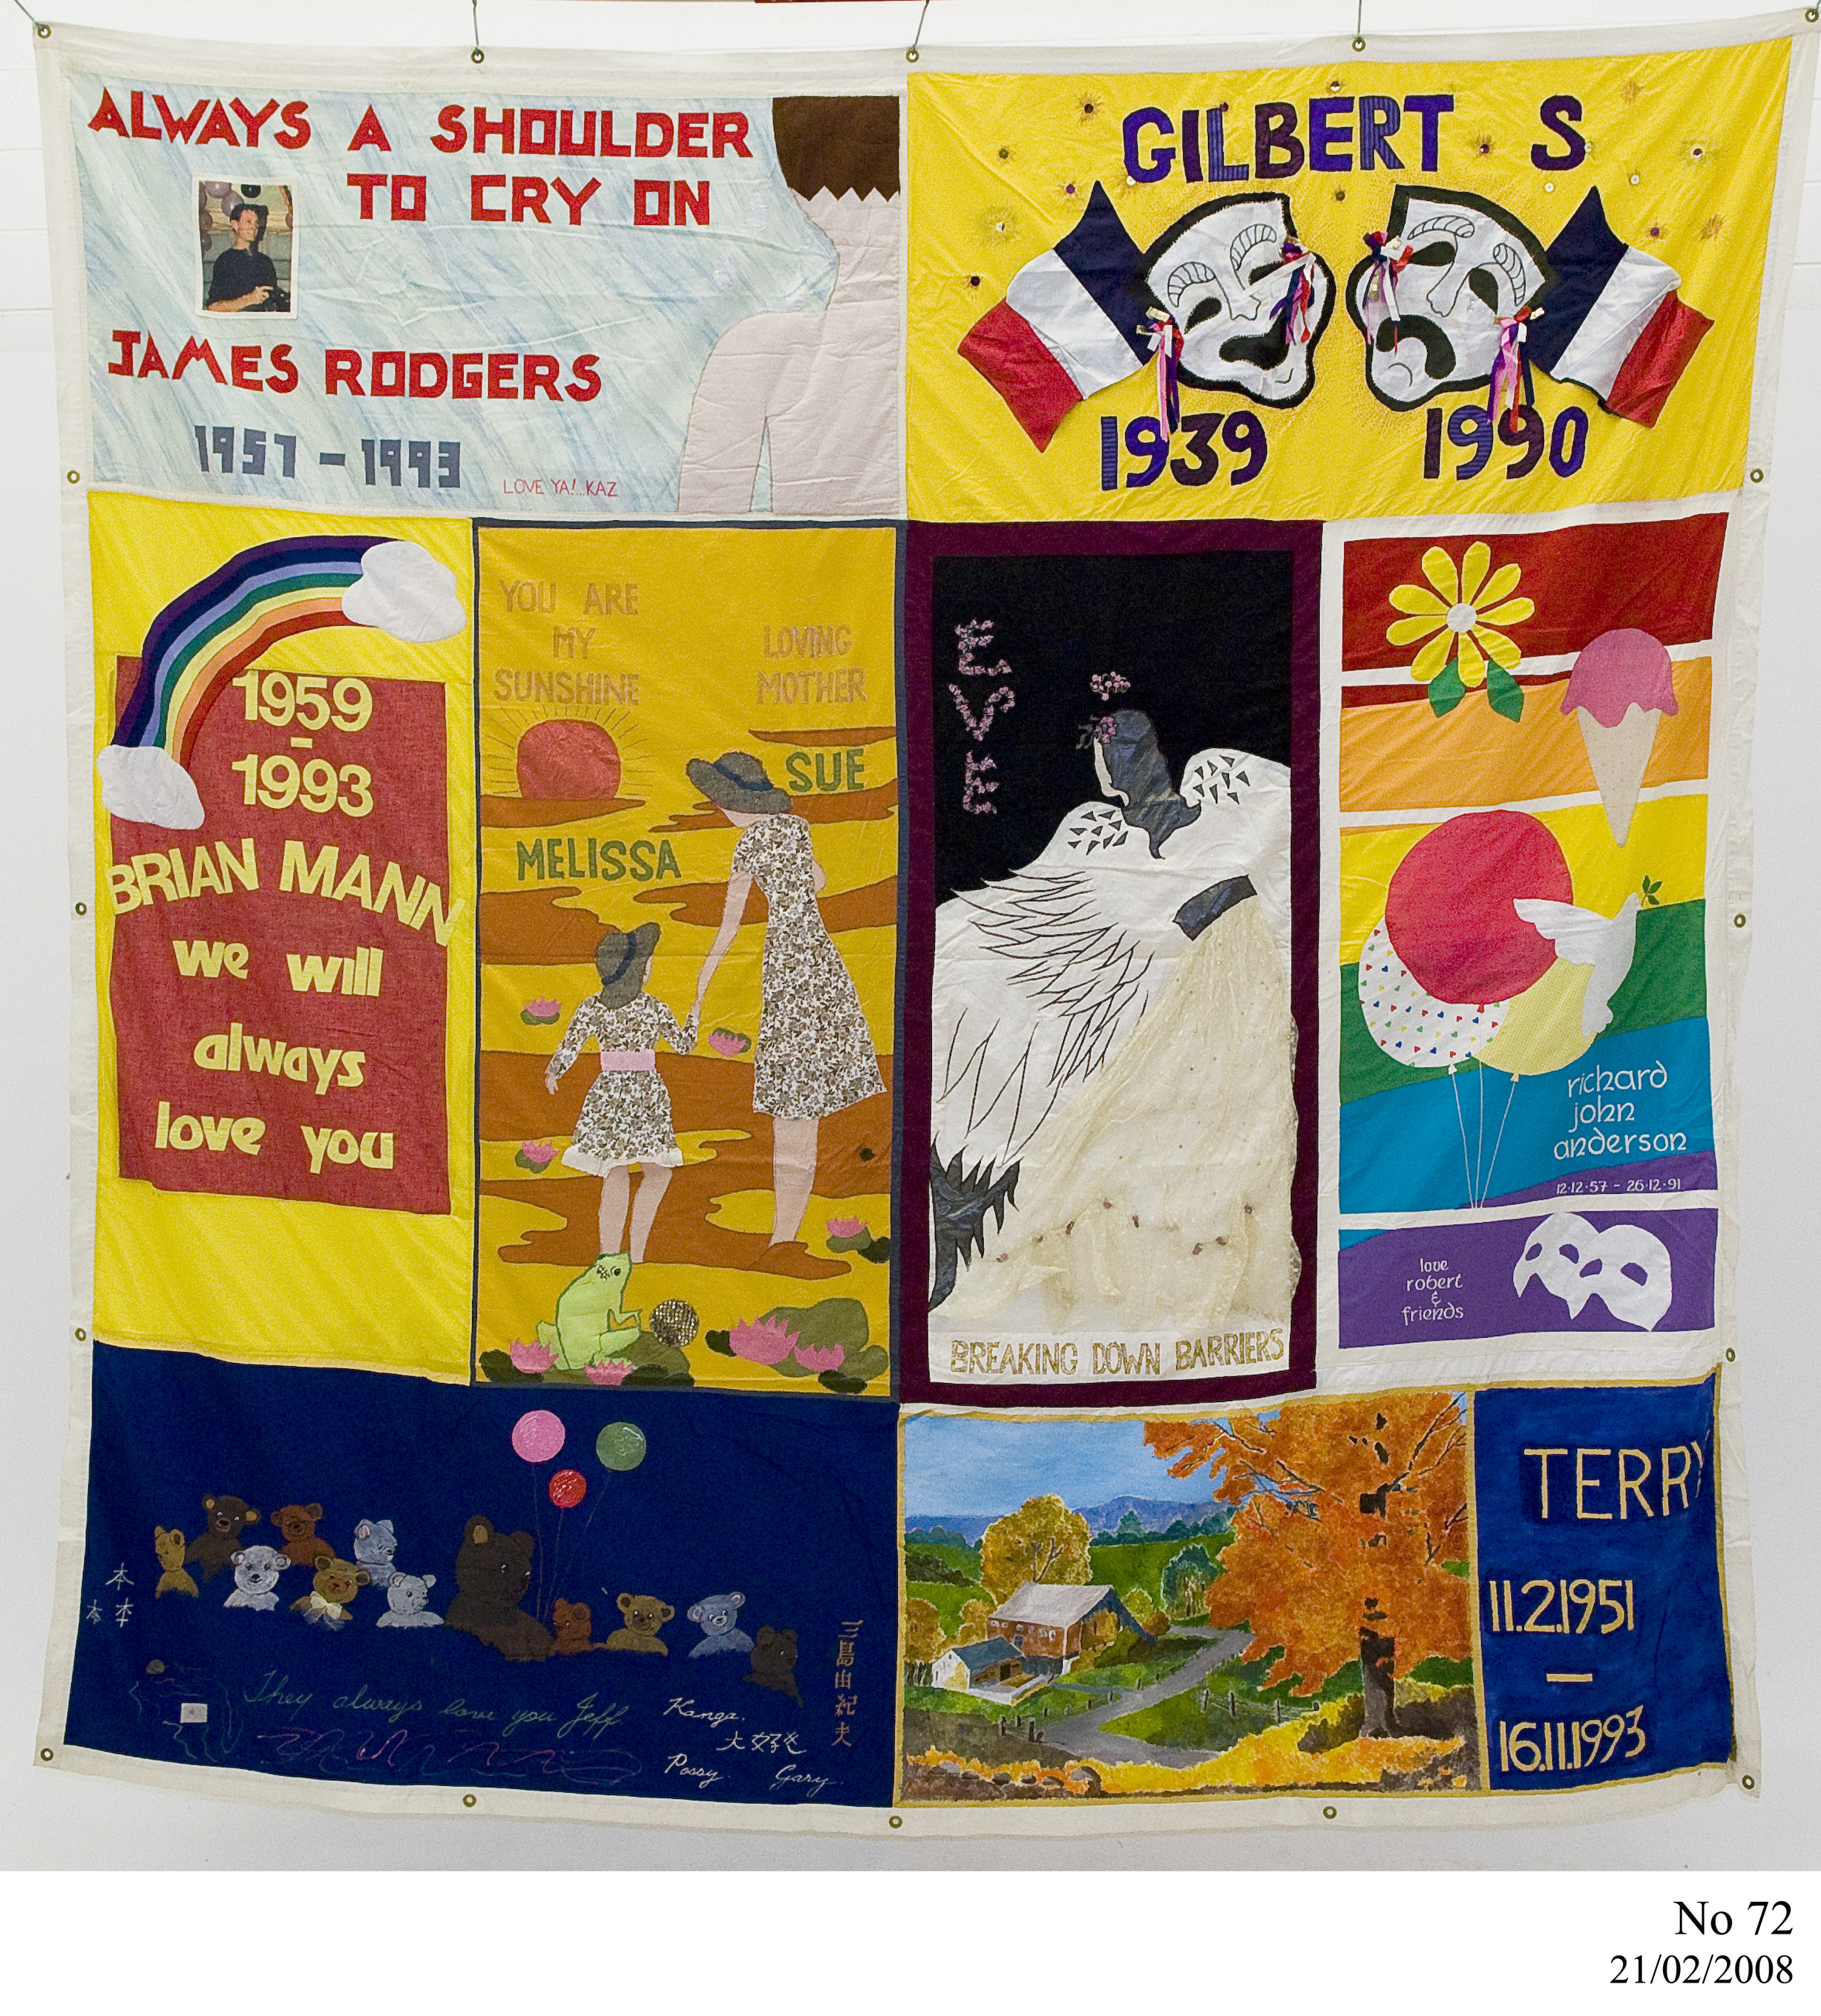 Collecting an Epidemic: The AIDS Memorial Quilt